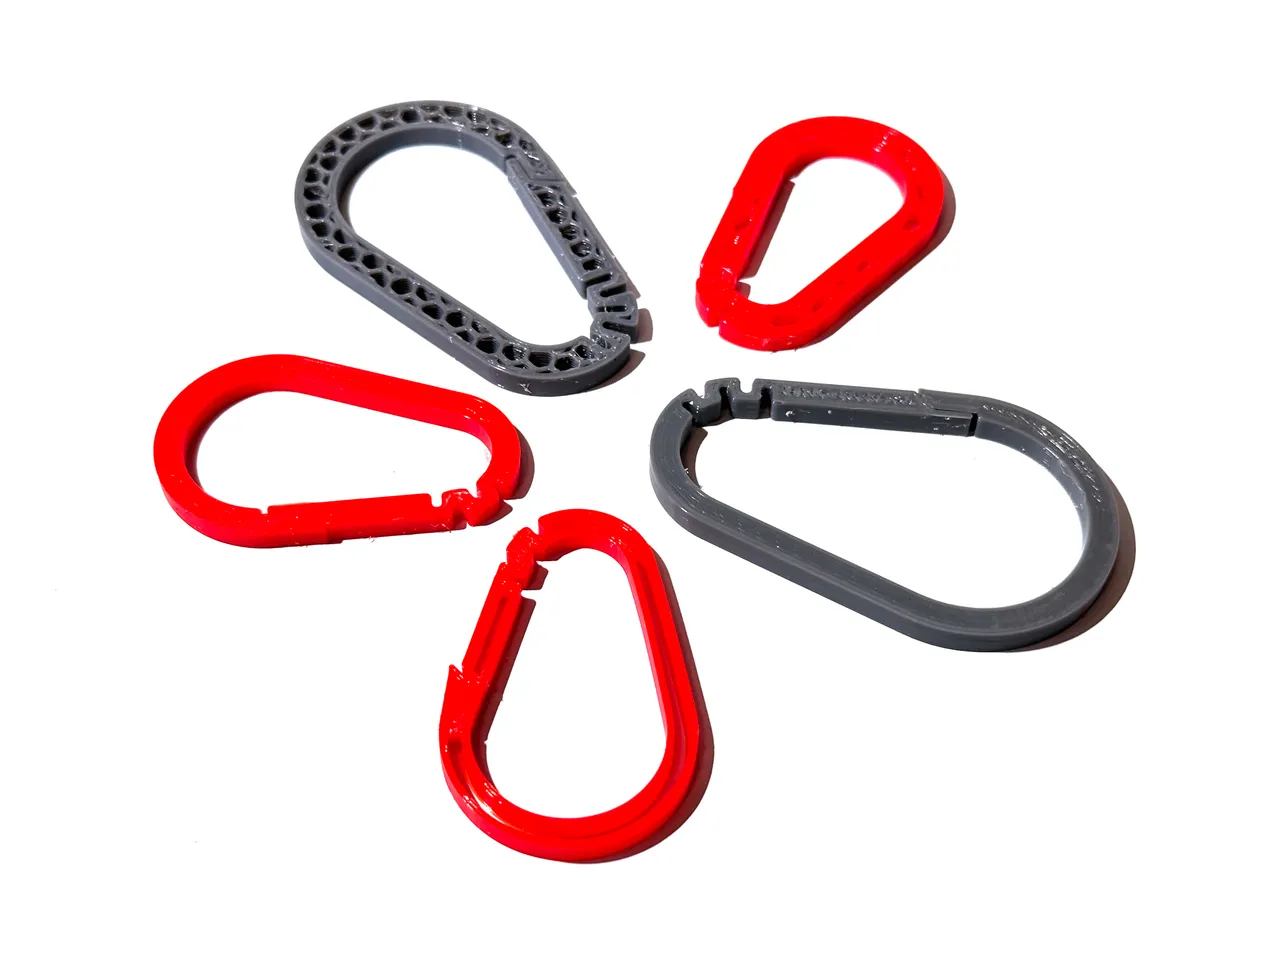 Simple Carabiner Clips - Style them your way! by GlennovitS 3D